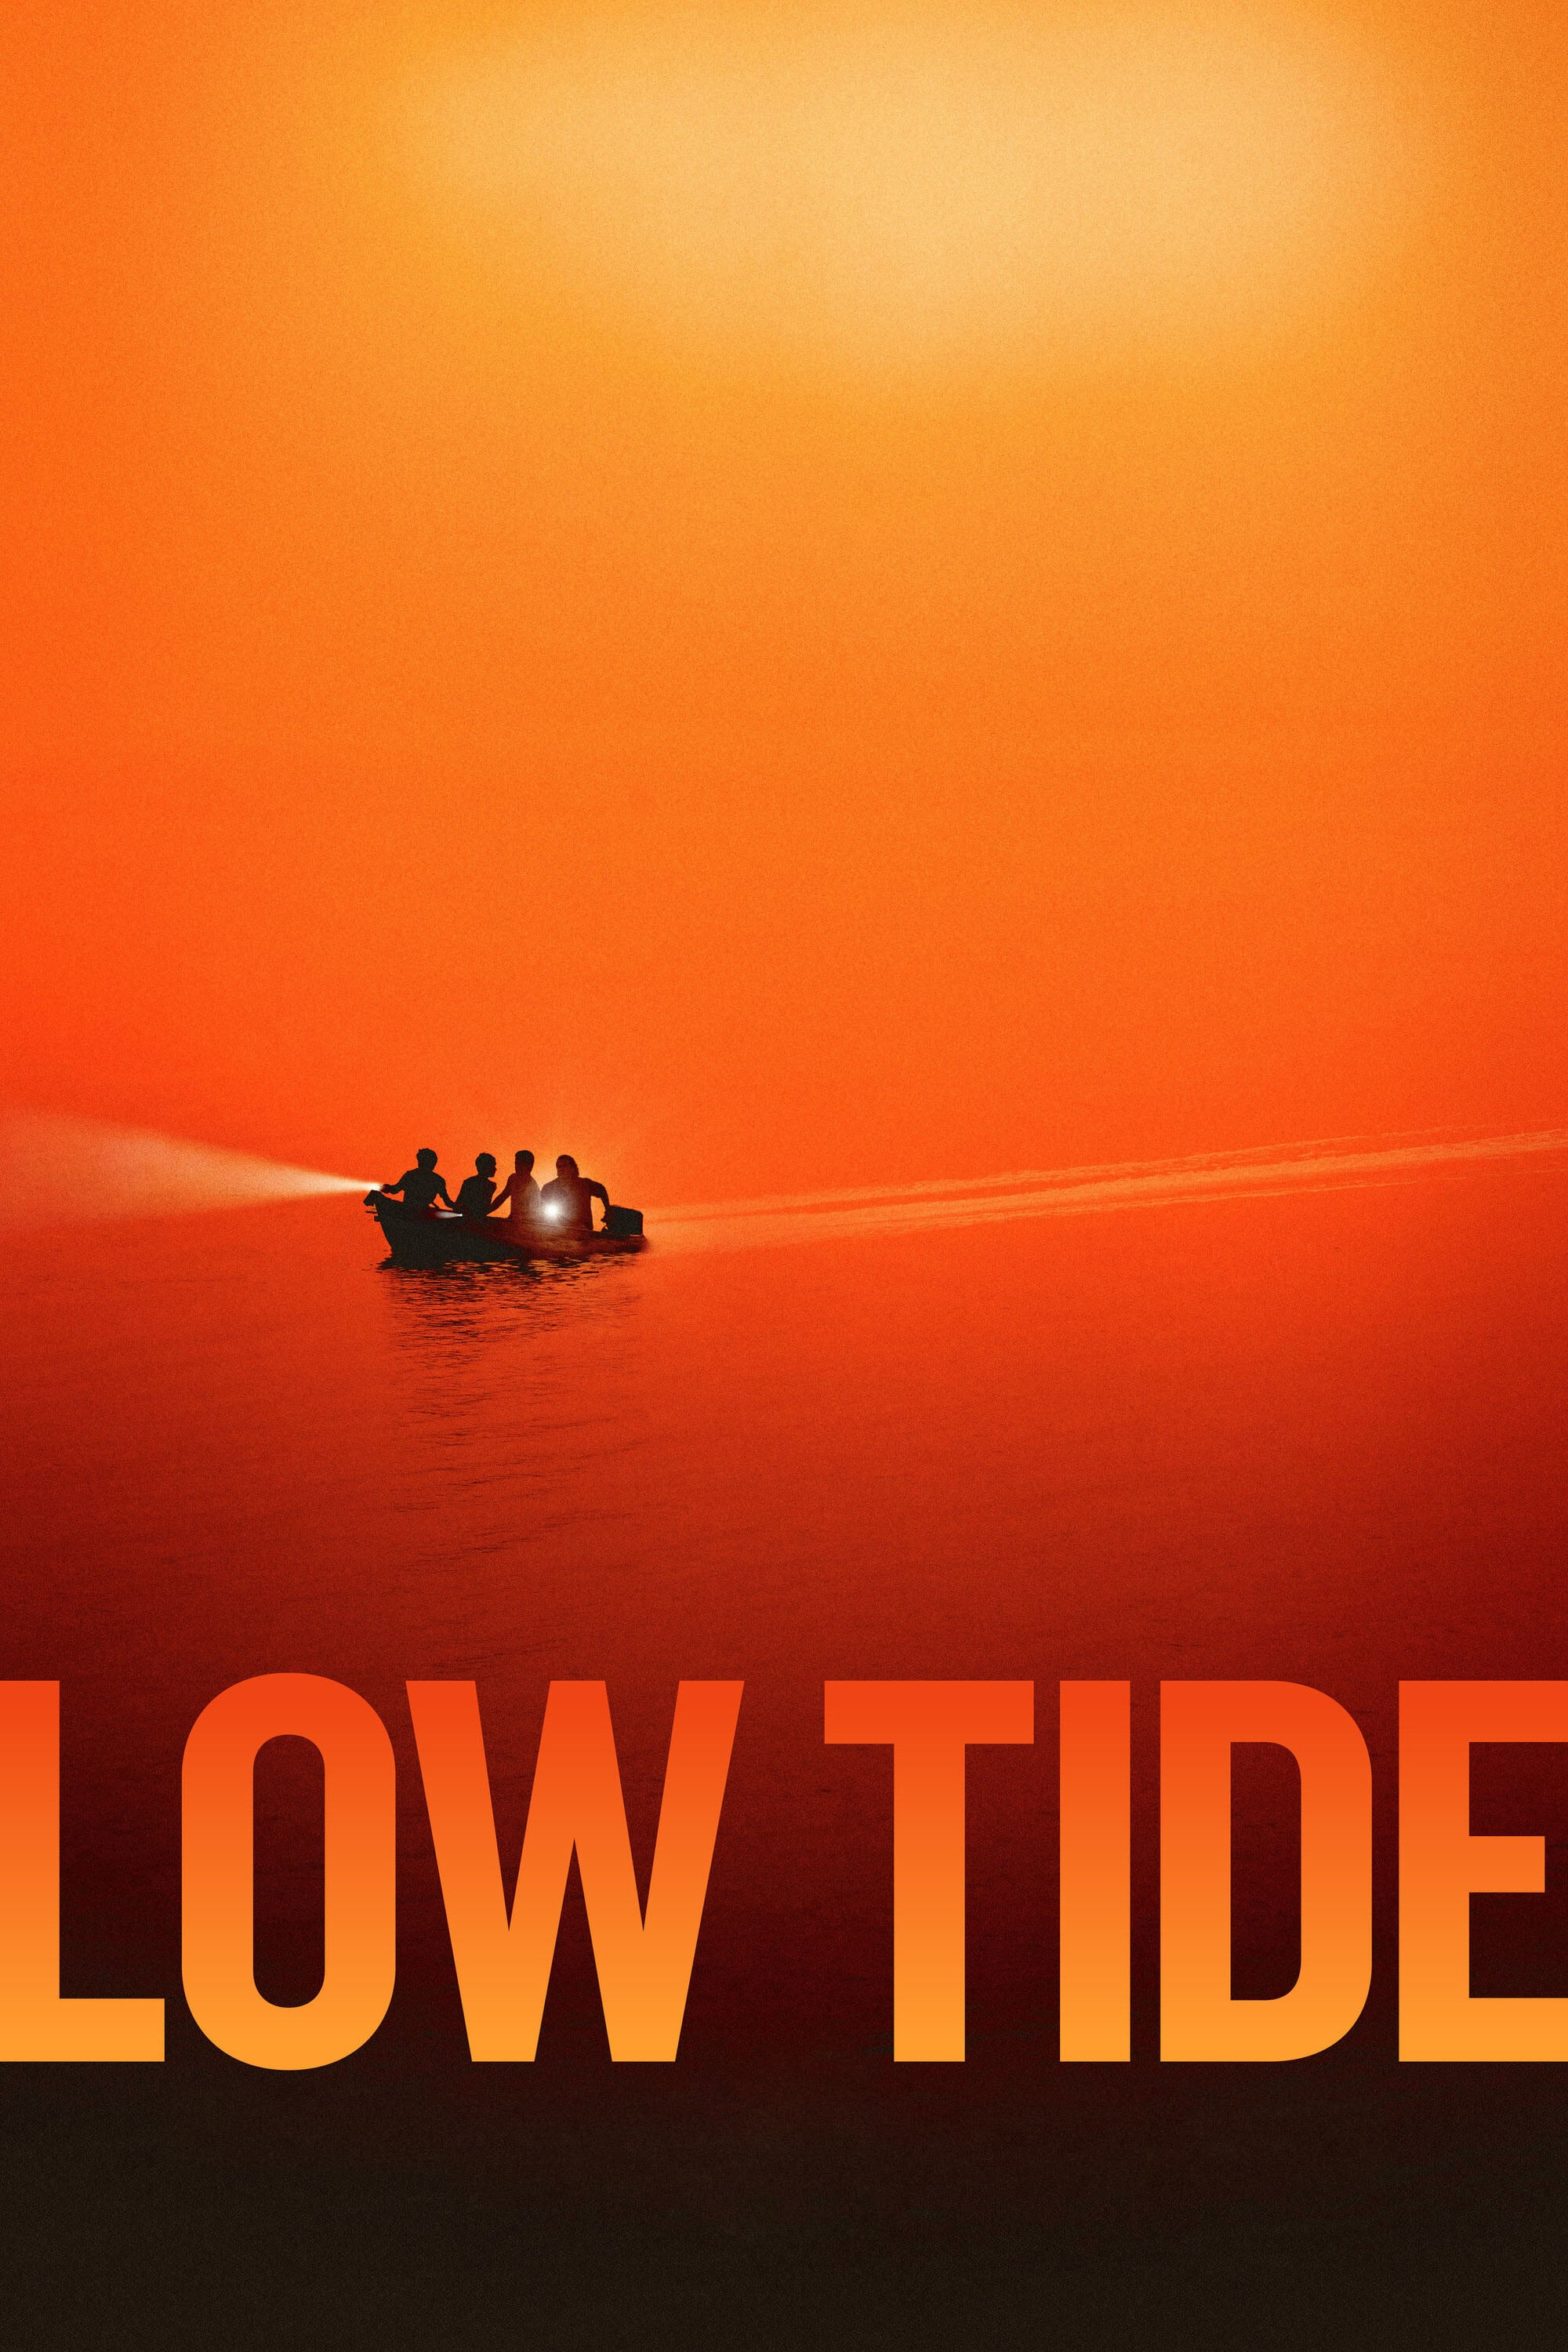 Poster for the movie "Low Tide"